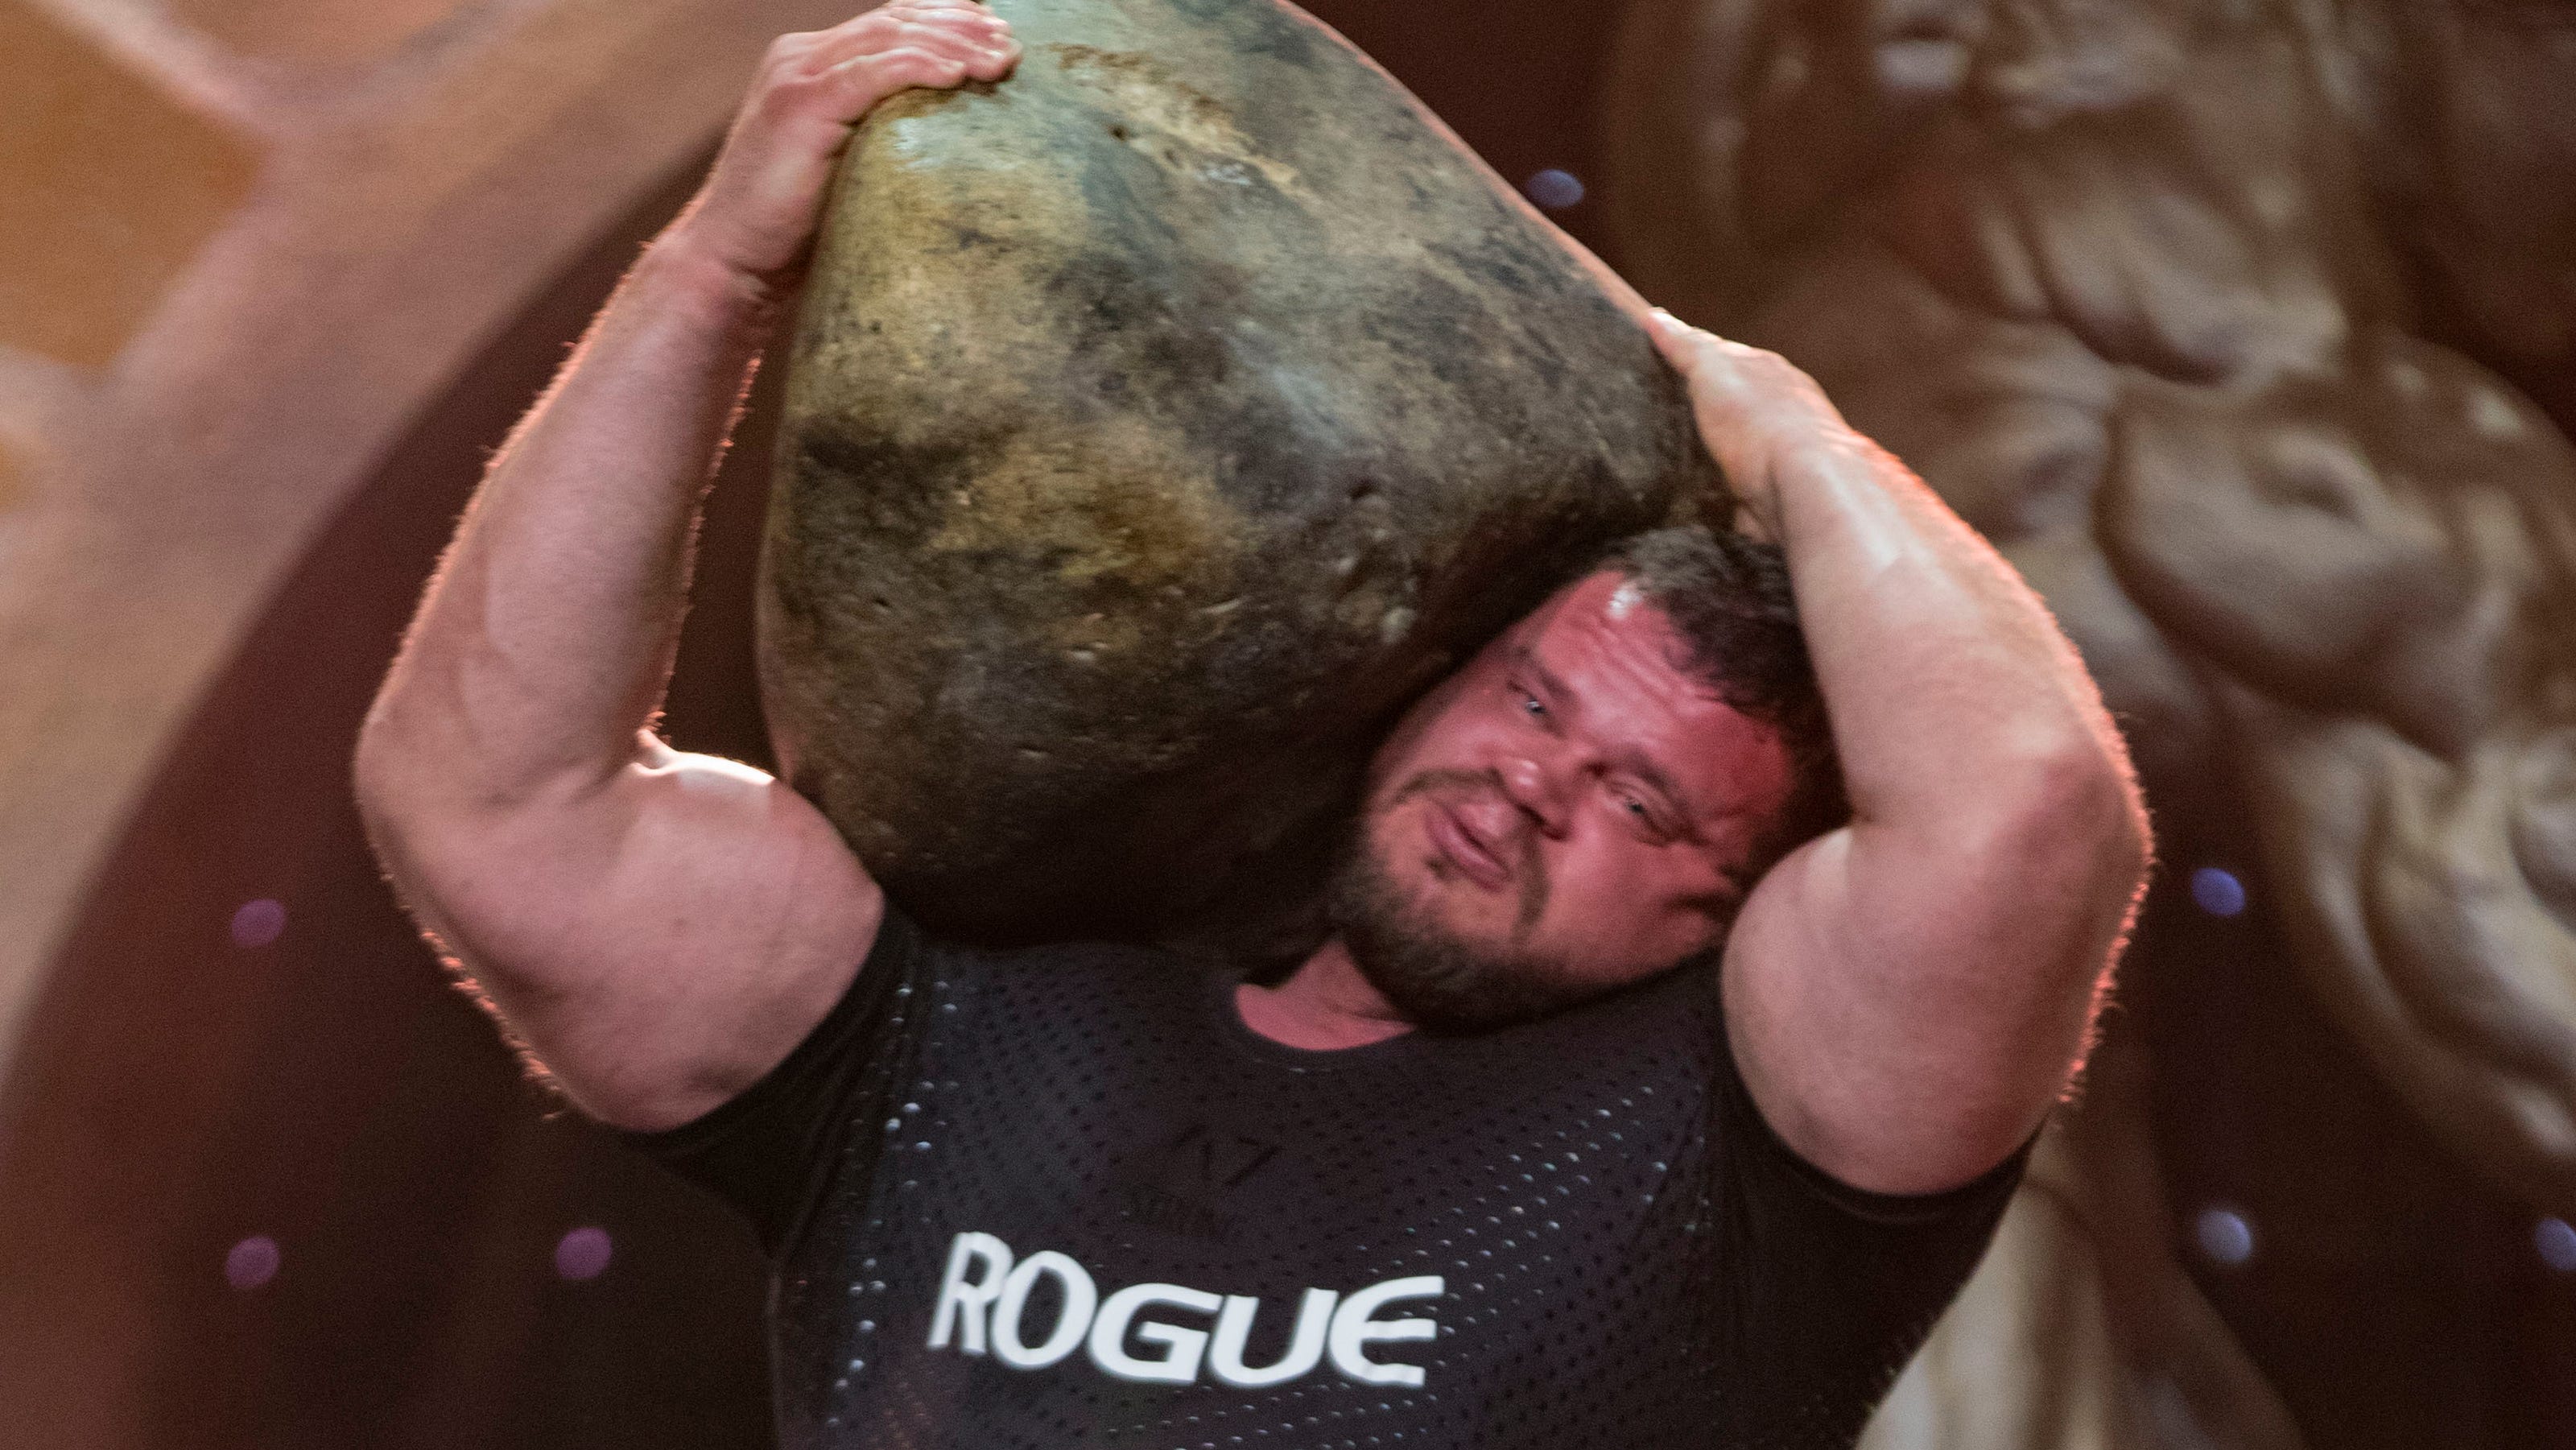 World's Strongest Man Martins Licis thriving while social distancing